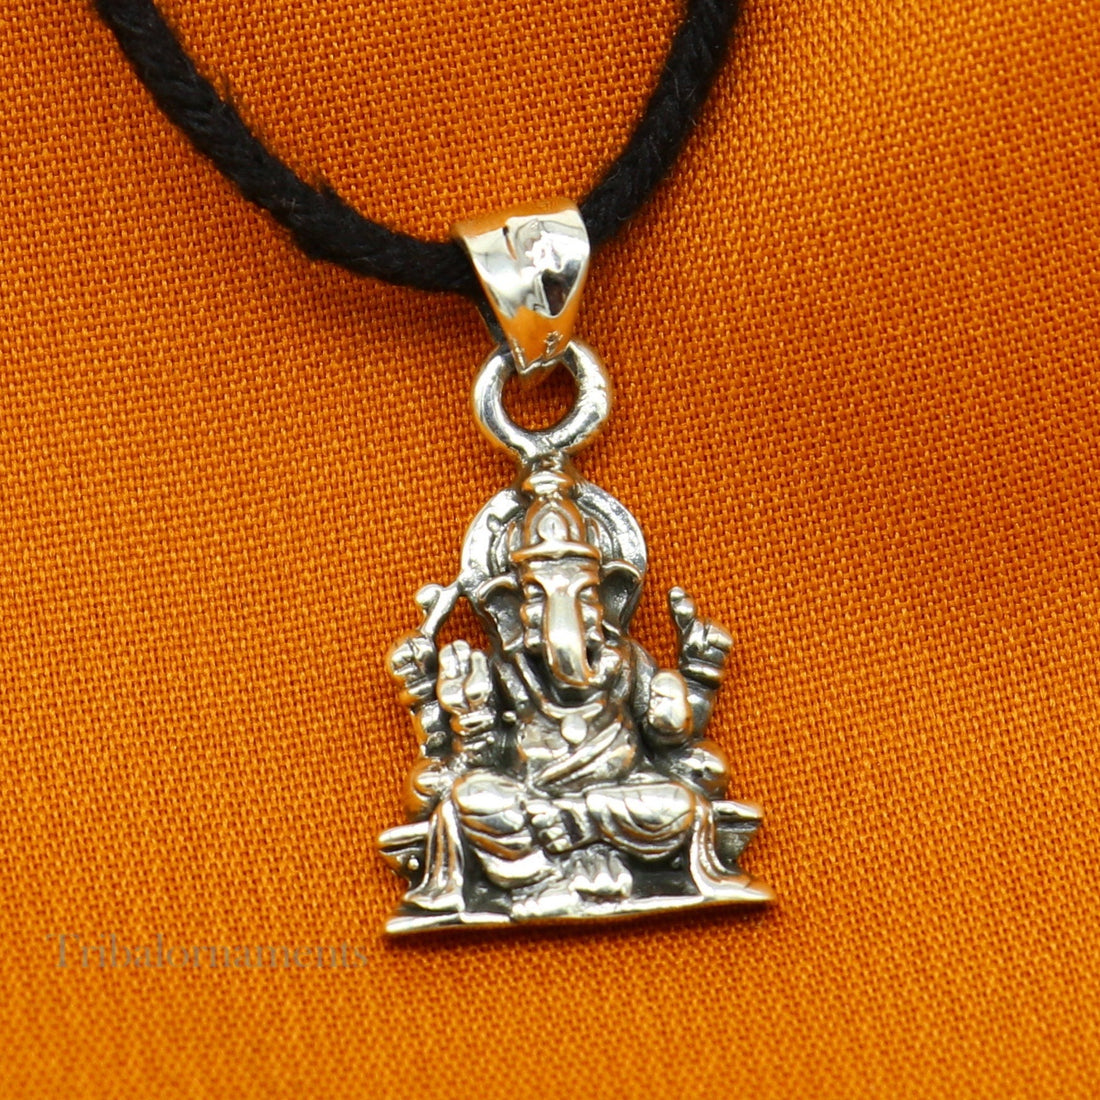 Divine lord Ganesha blessing pendant, excellent vintage designer 925 sterling silver handmade jewelry from indiassp968 - TRIBAL ORNAMENTS